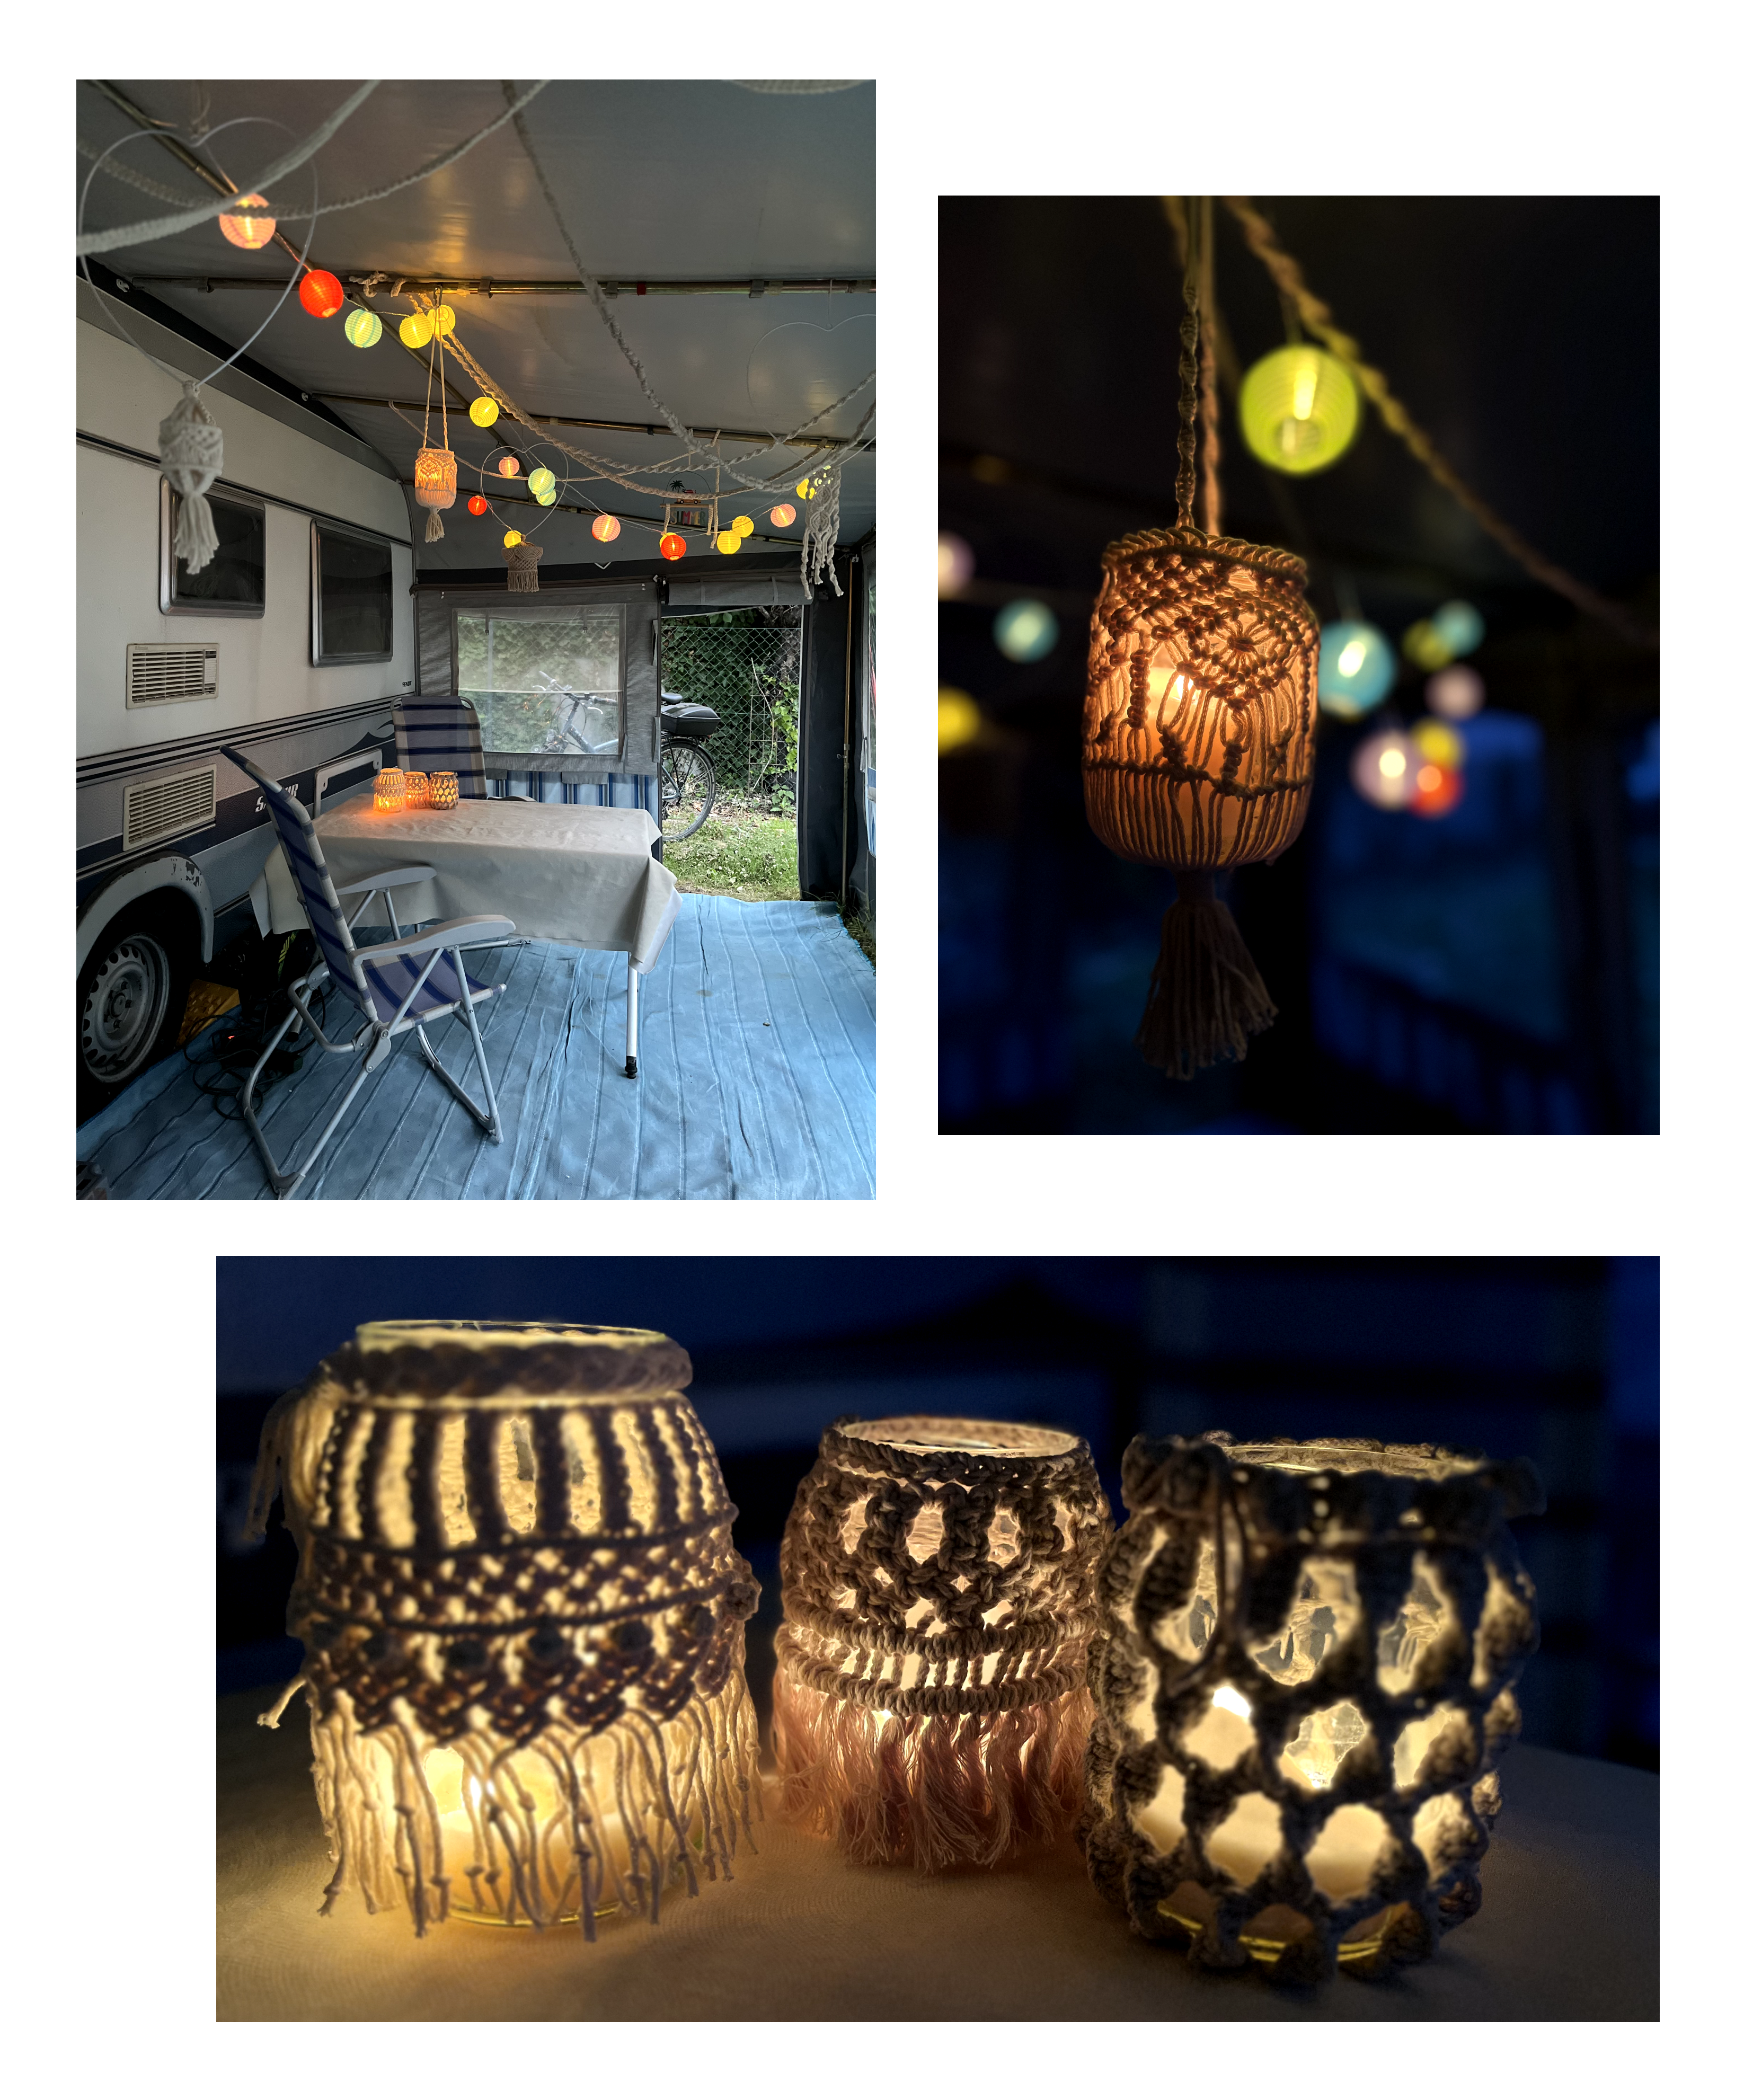 Extra space outside the camper van with macrame decorations